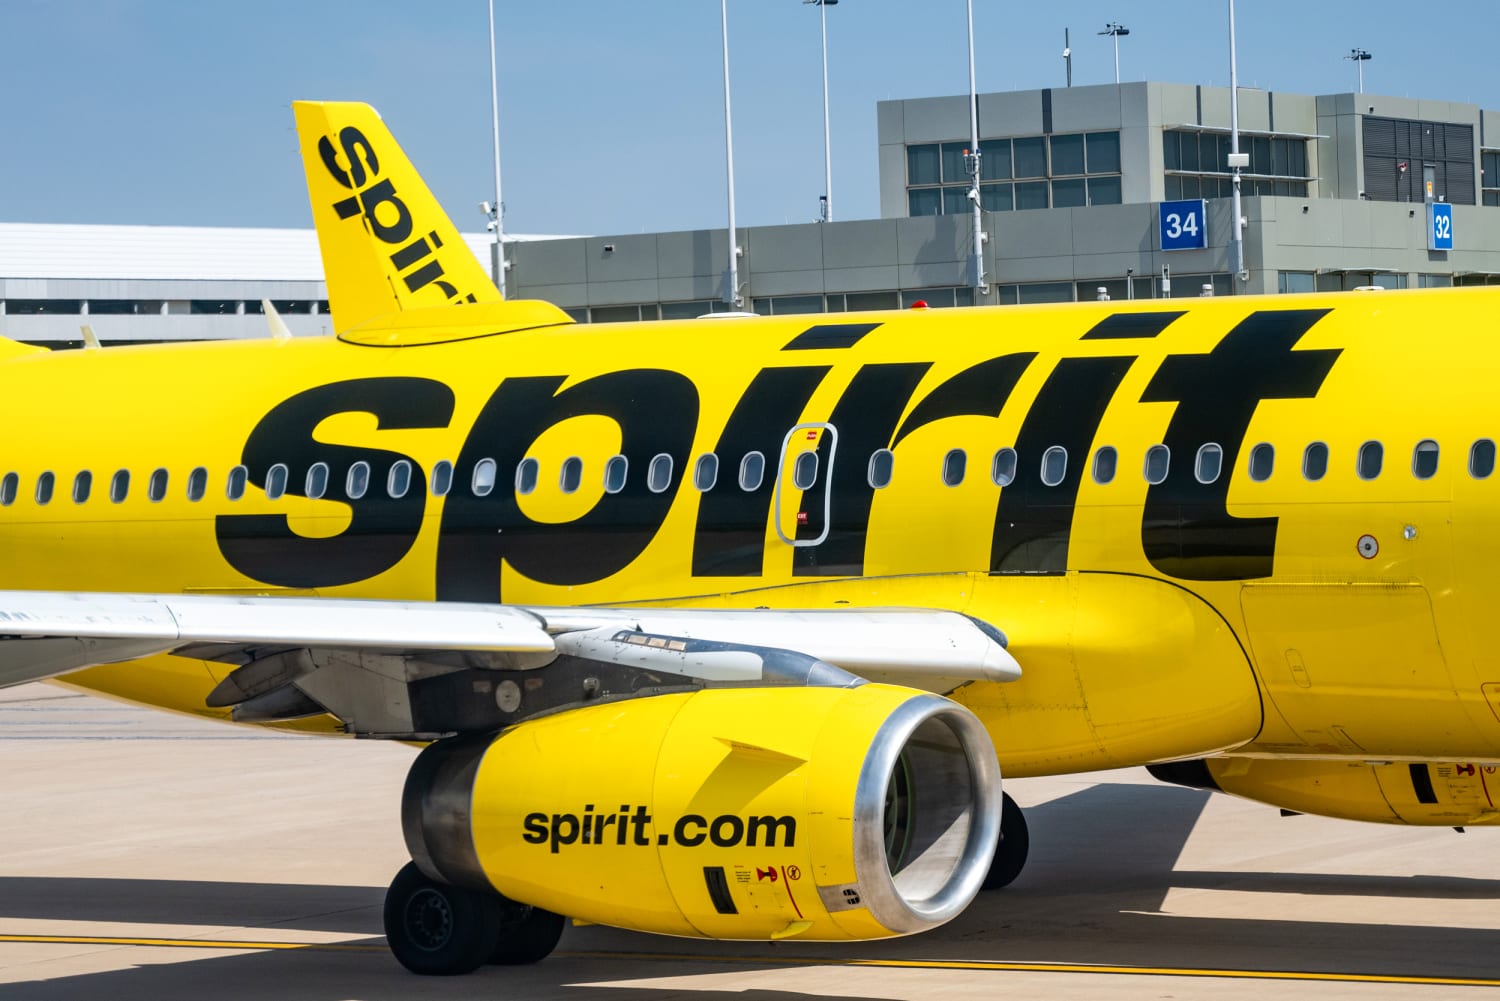 Spirit Airlines blames huge delays, cancellations on technical issue